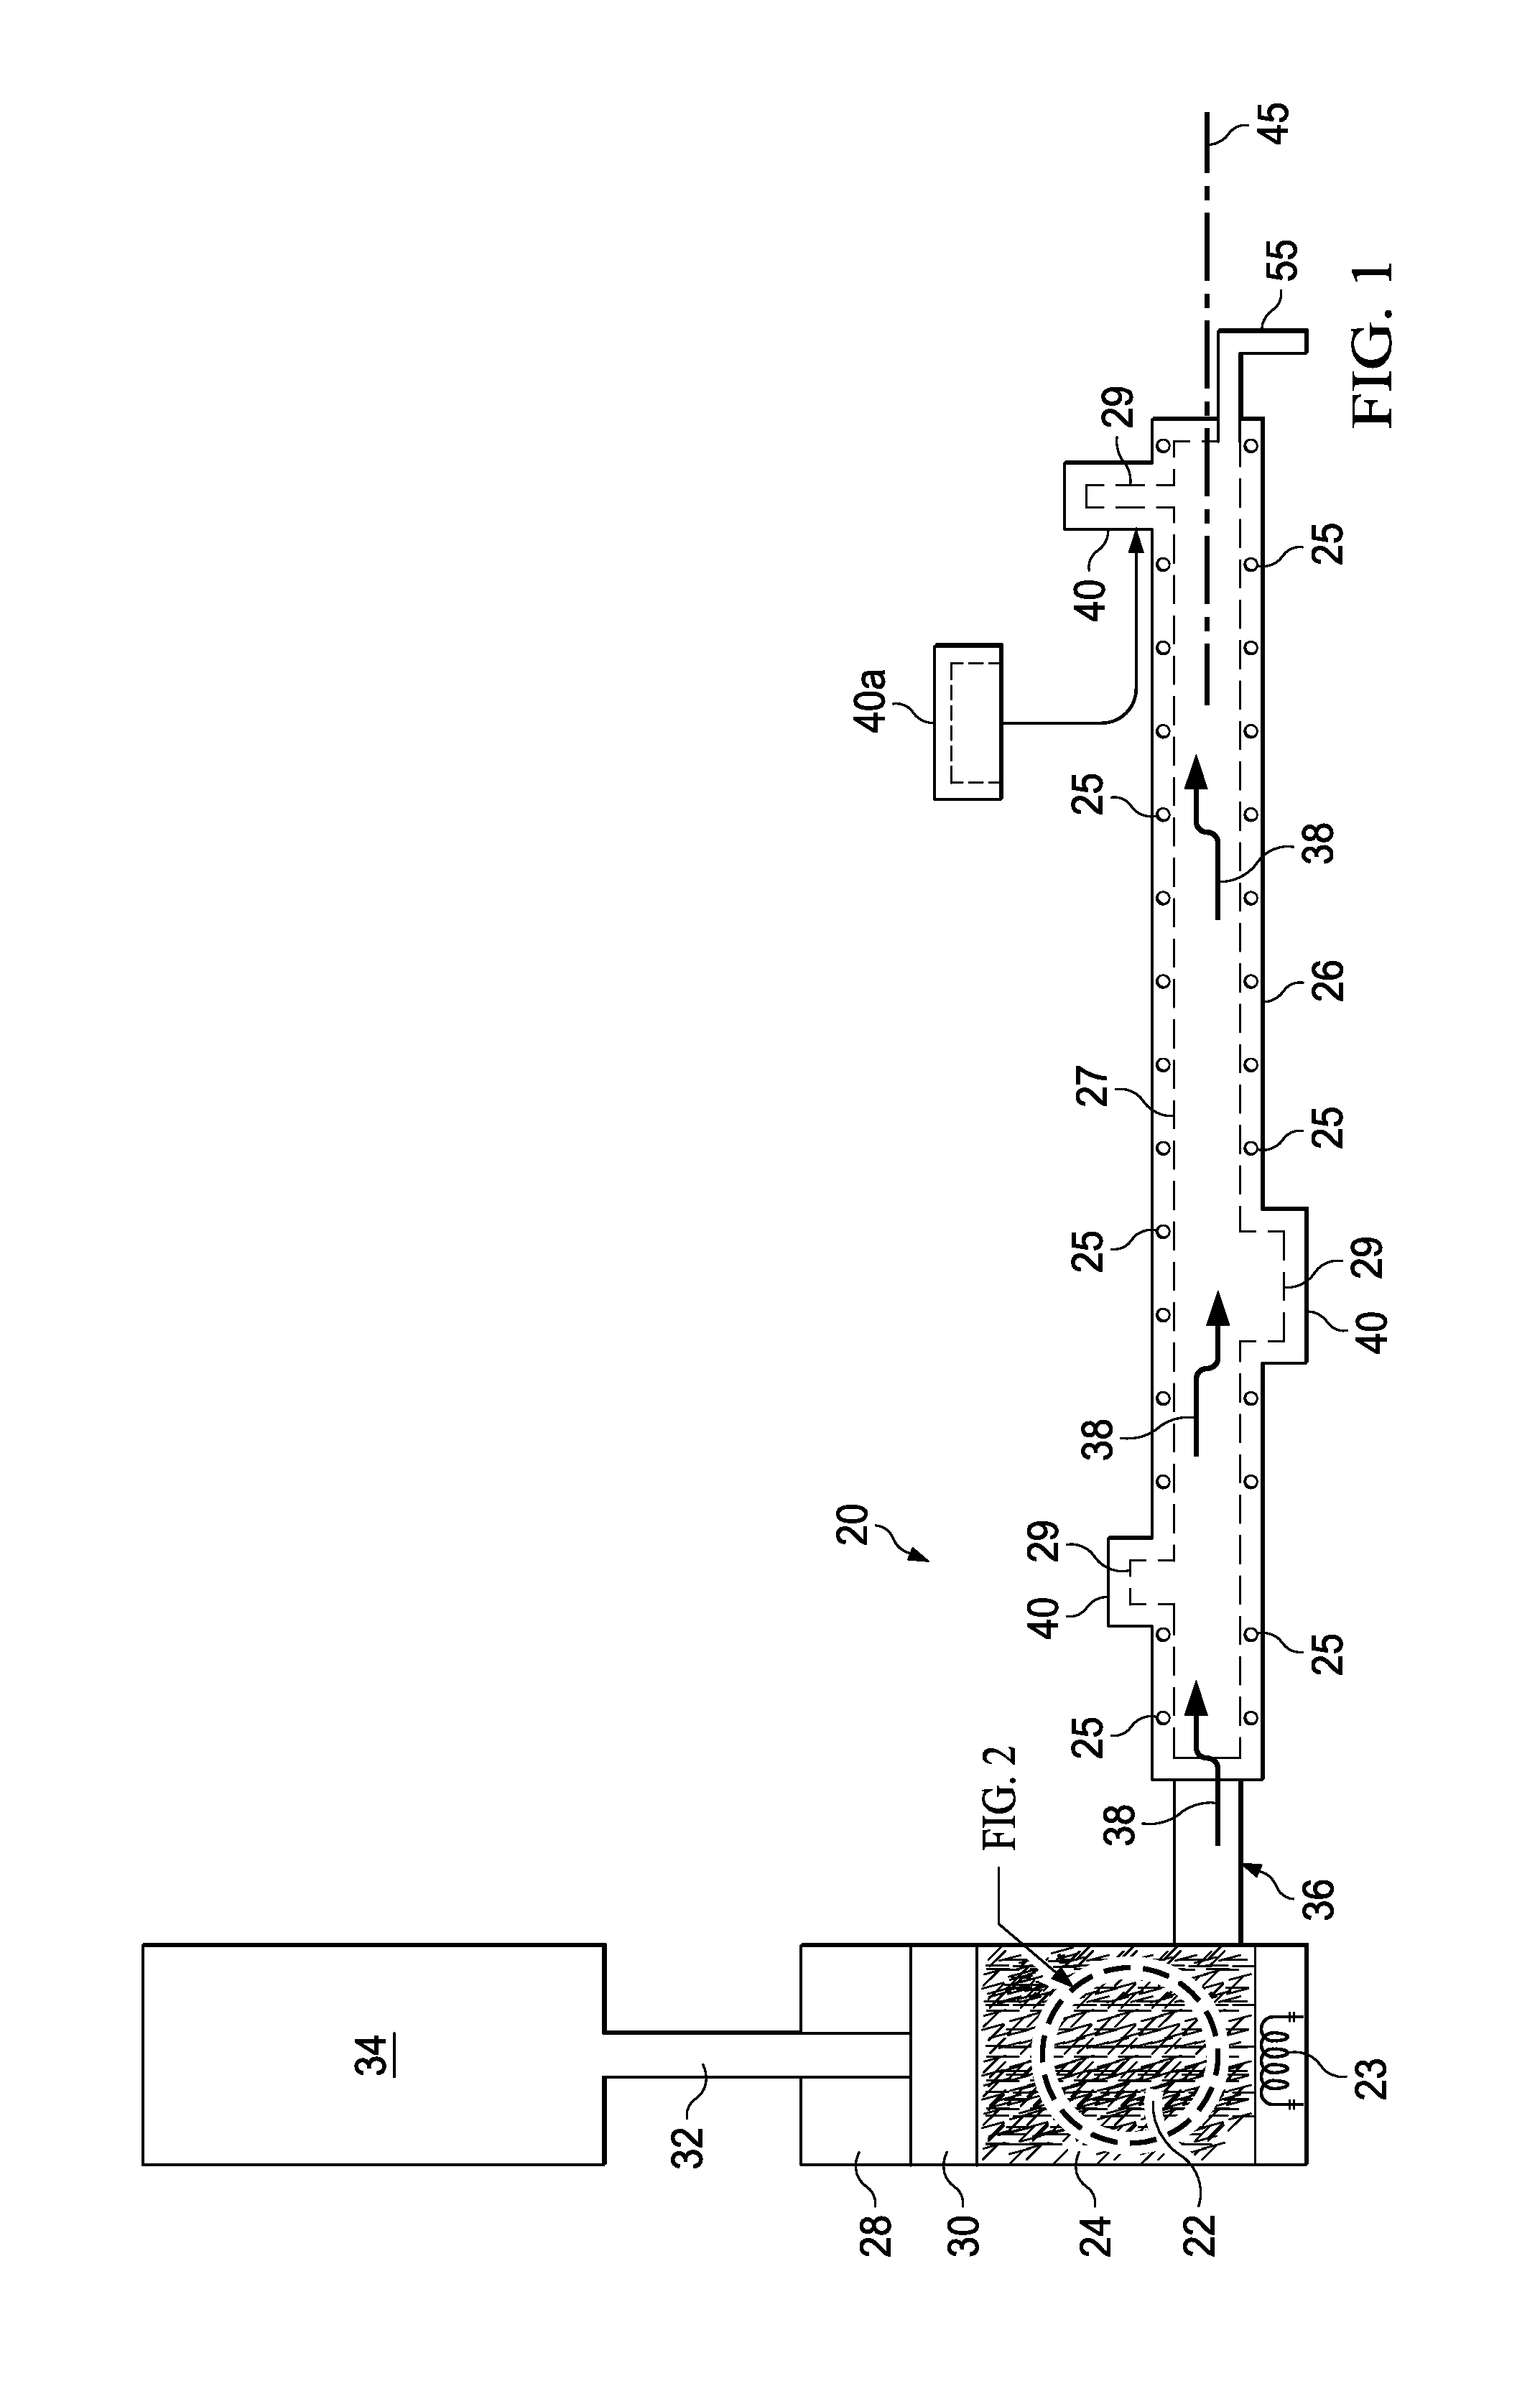 Method and apparatus for compression molding fiber reinforced thermoplastic parts